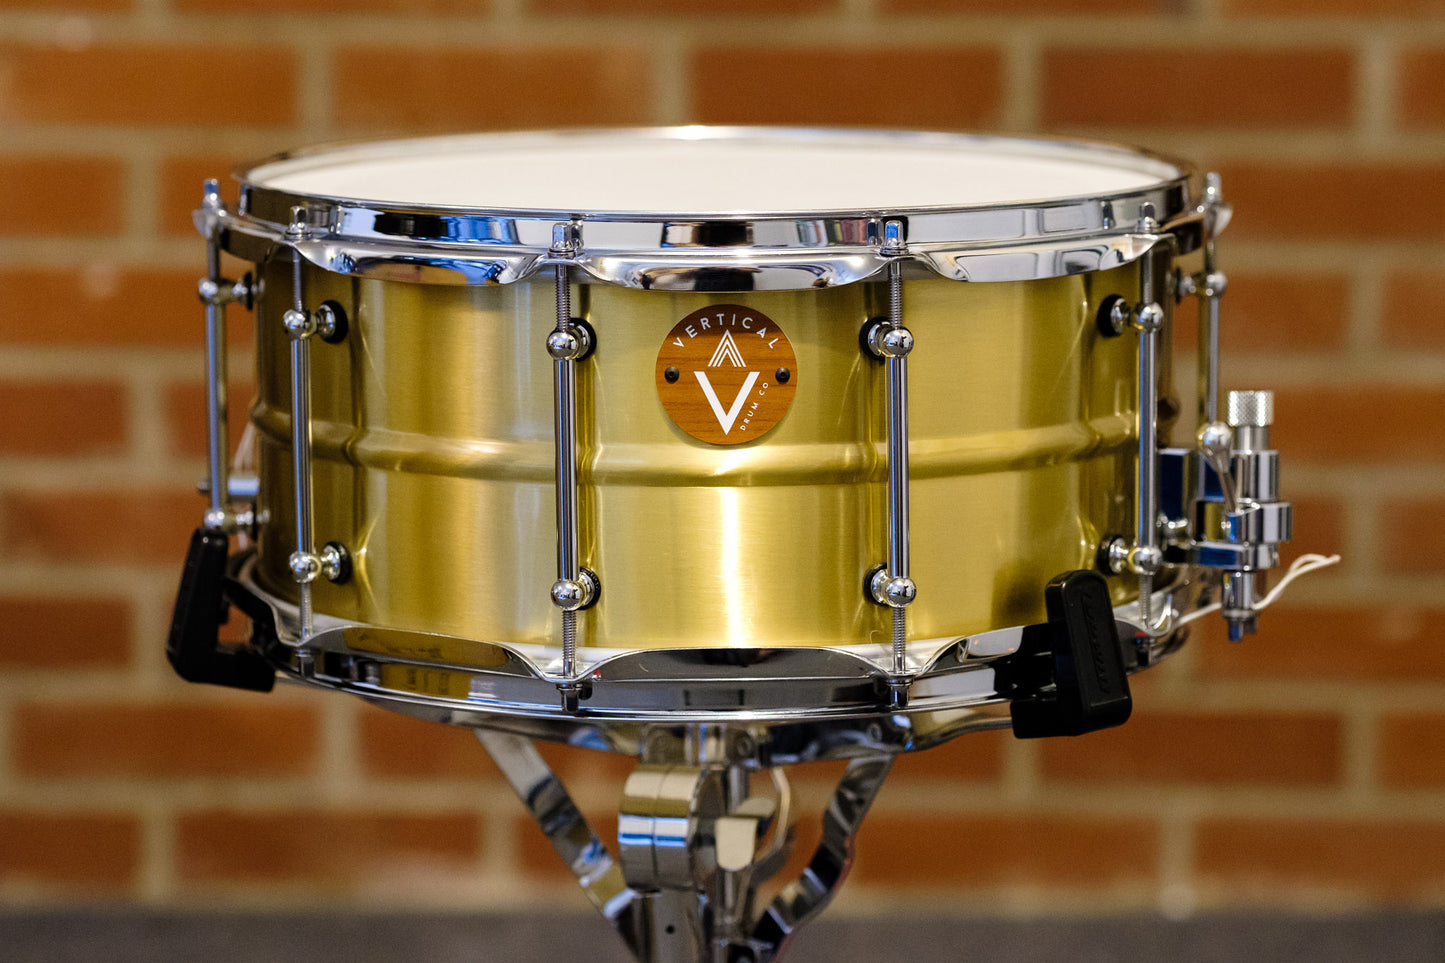 Vertical Drum Co. 'Refrain' 6.5"×14" Raw Brass Snare Drum CUSTOM ORDER MADE IN THE USA